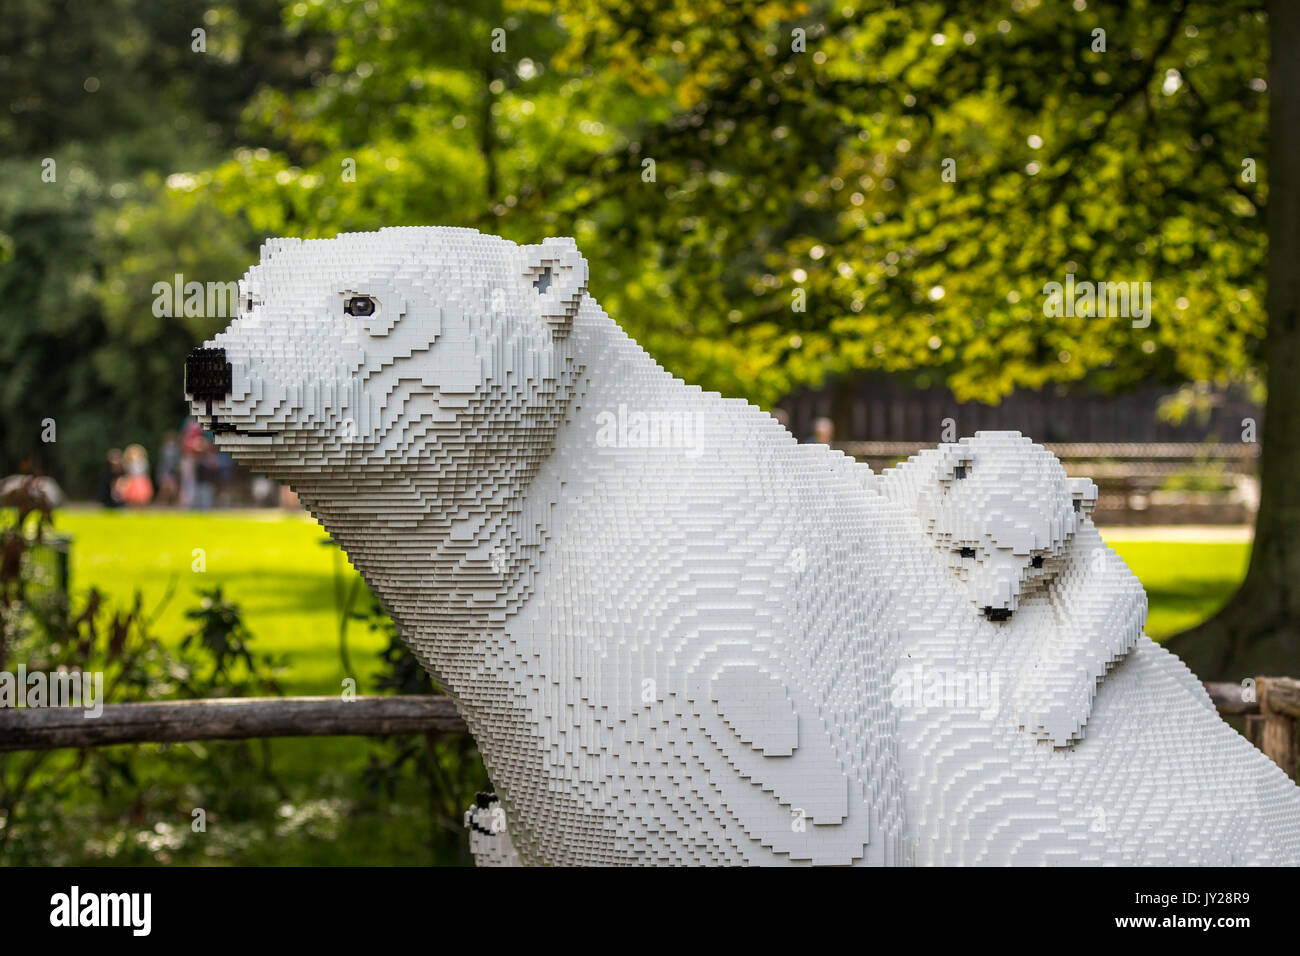 Planckendael zoo, Mechelen, Belgium - AUGUST 17, 2017 : White polar bear  and baby bear from lego bricks in exhibition 'Nature Connects' by Sean  Kenney Stock Photo - Alamy